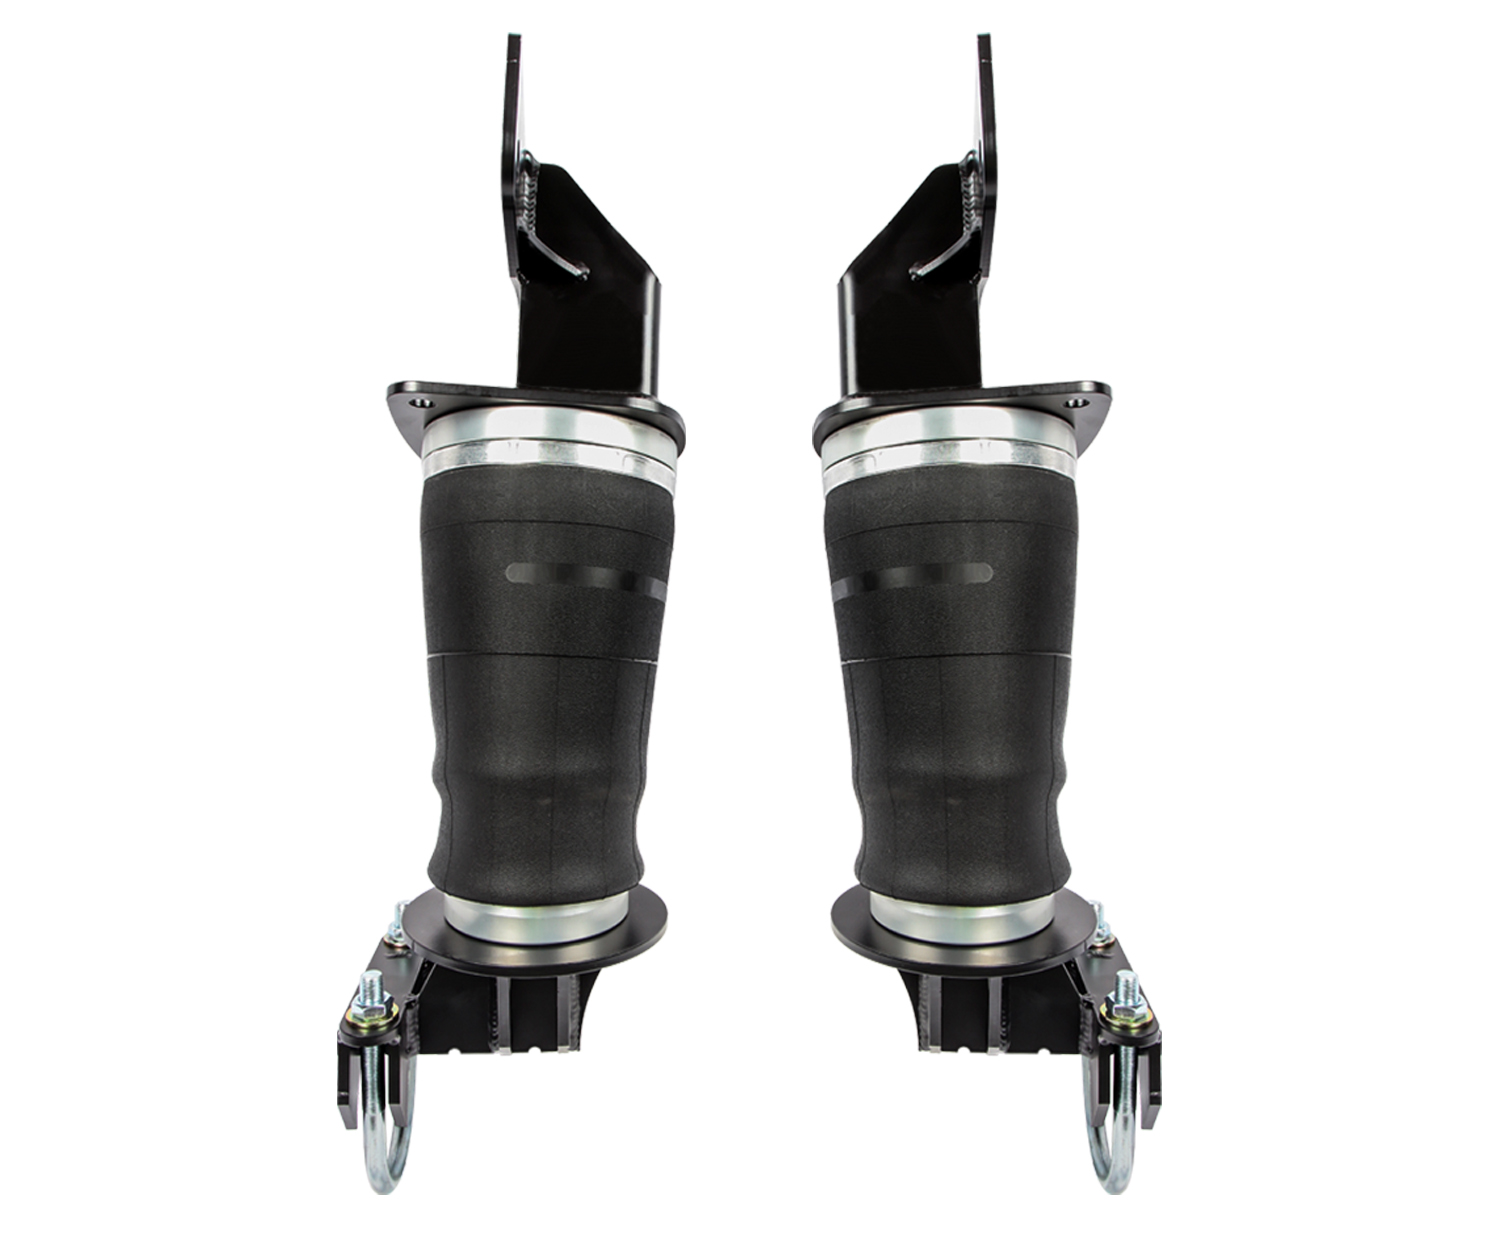 Carli Long Travel Air Bag System, For 4.5" Systems, 4.0" Axle Diameter